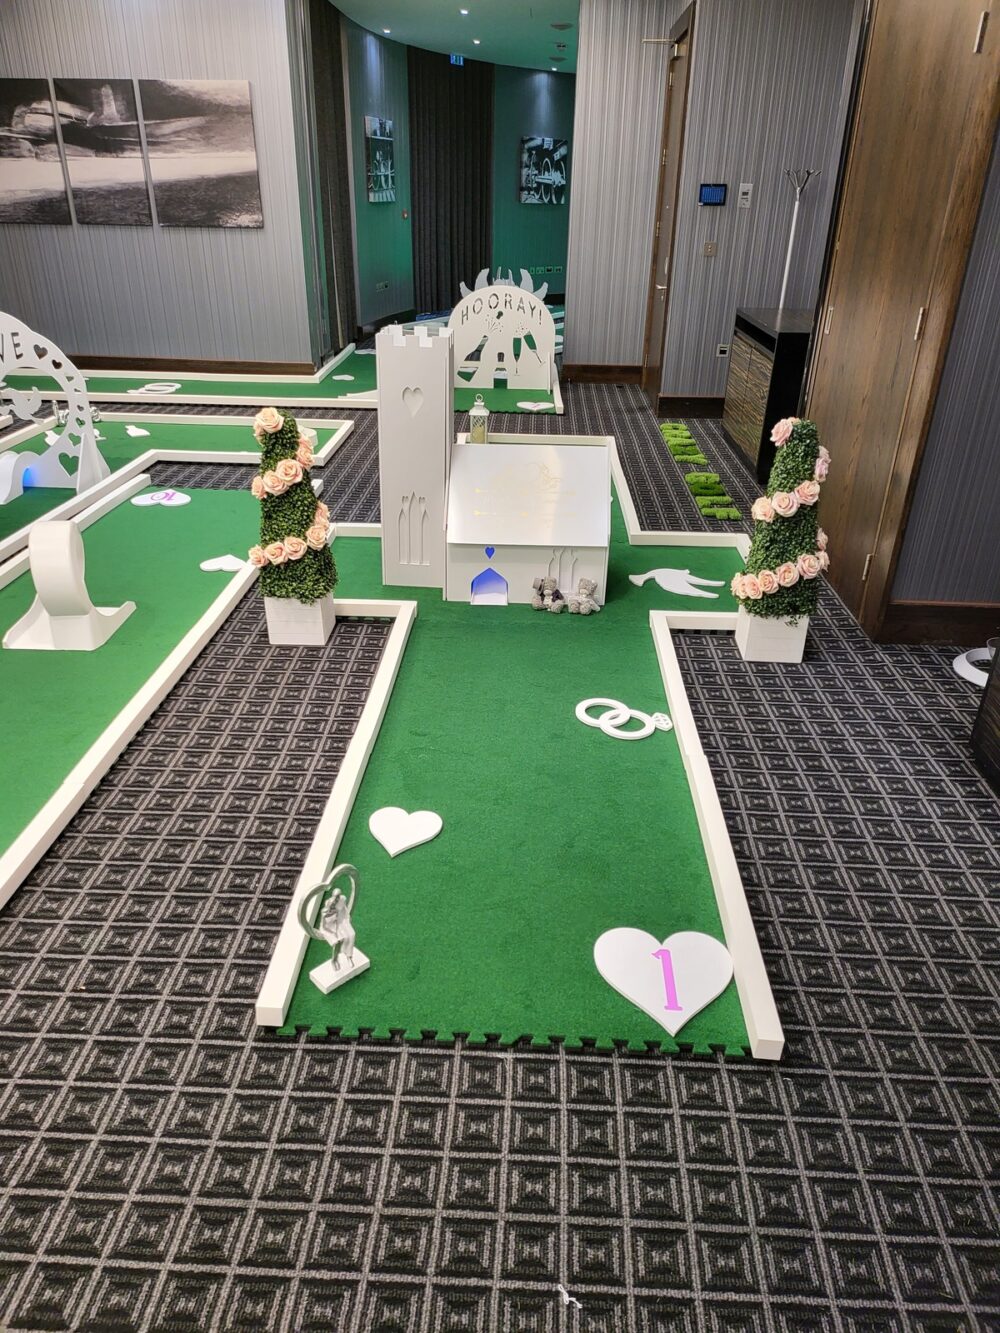 crazy golf equipment available for weddings, hire in south east UK